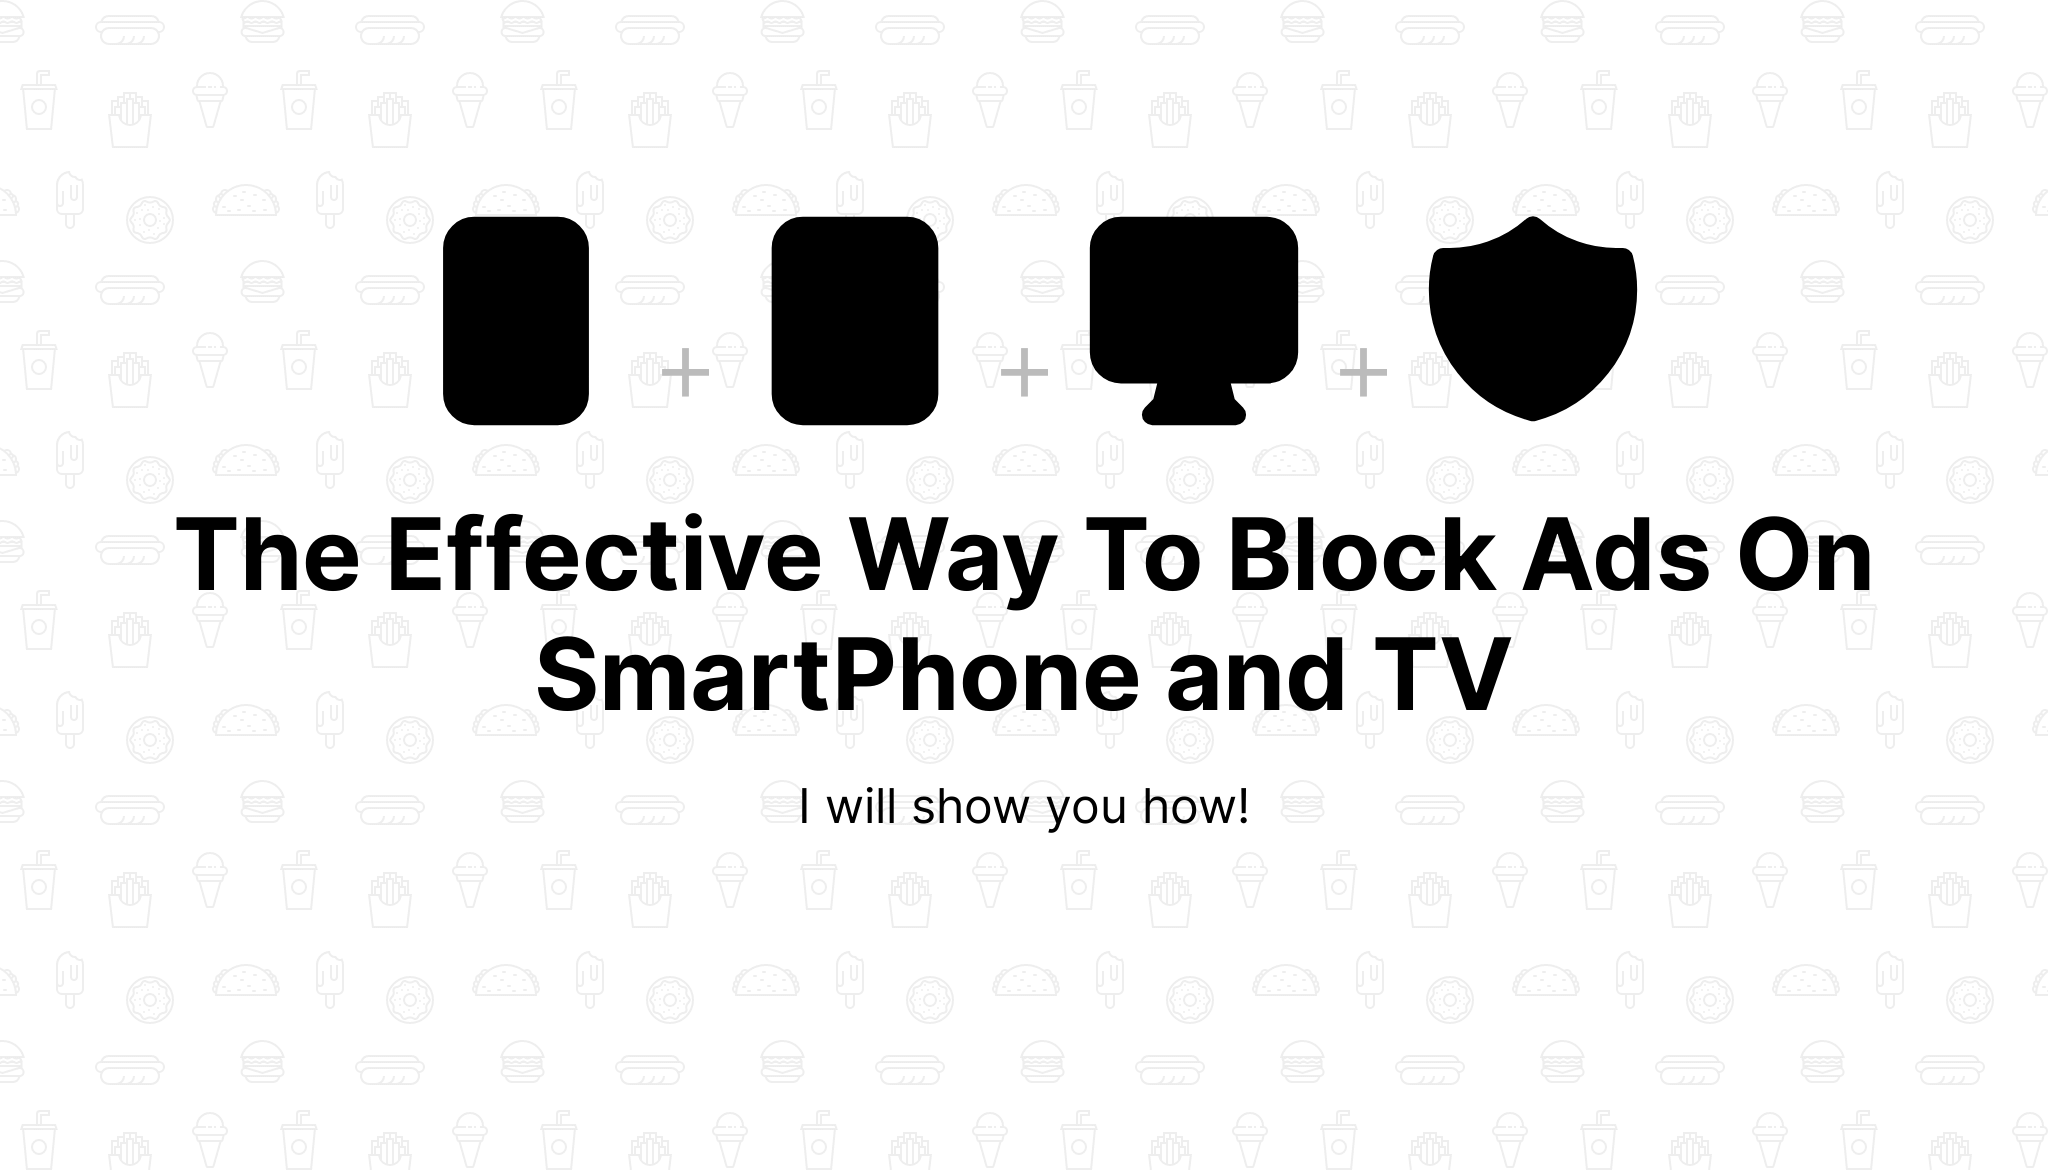 The Effective ways blocks ads on smartphones, tablets, TV, computer and all devices